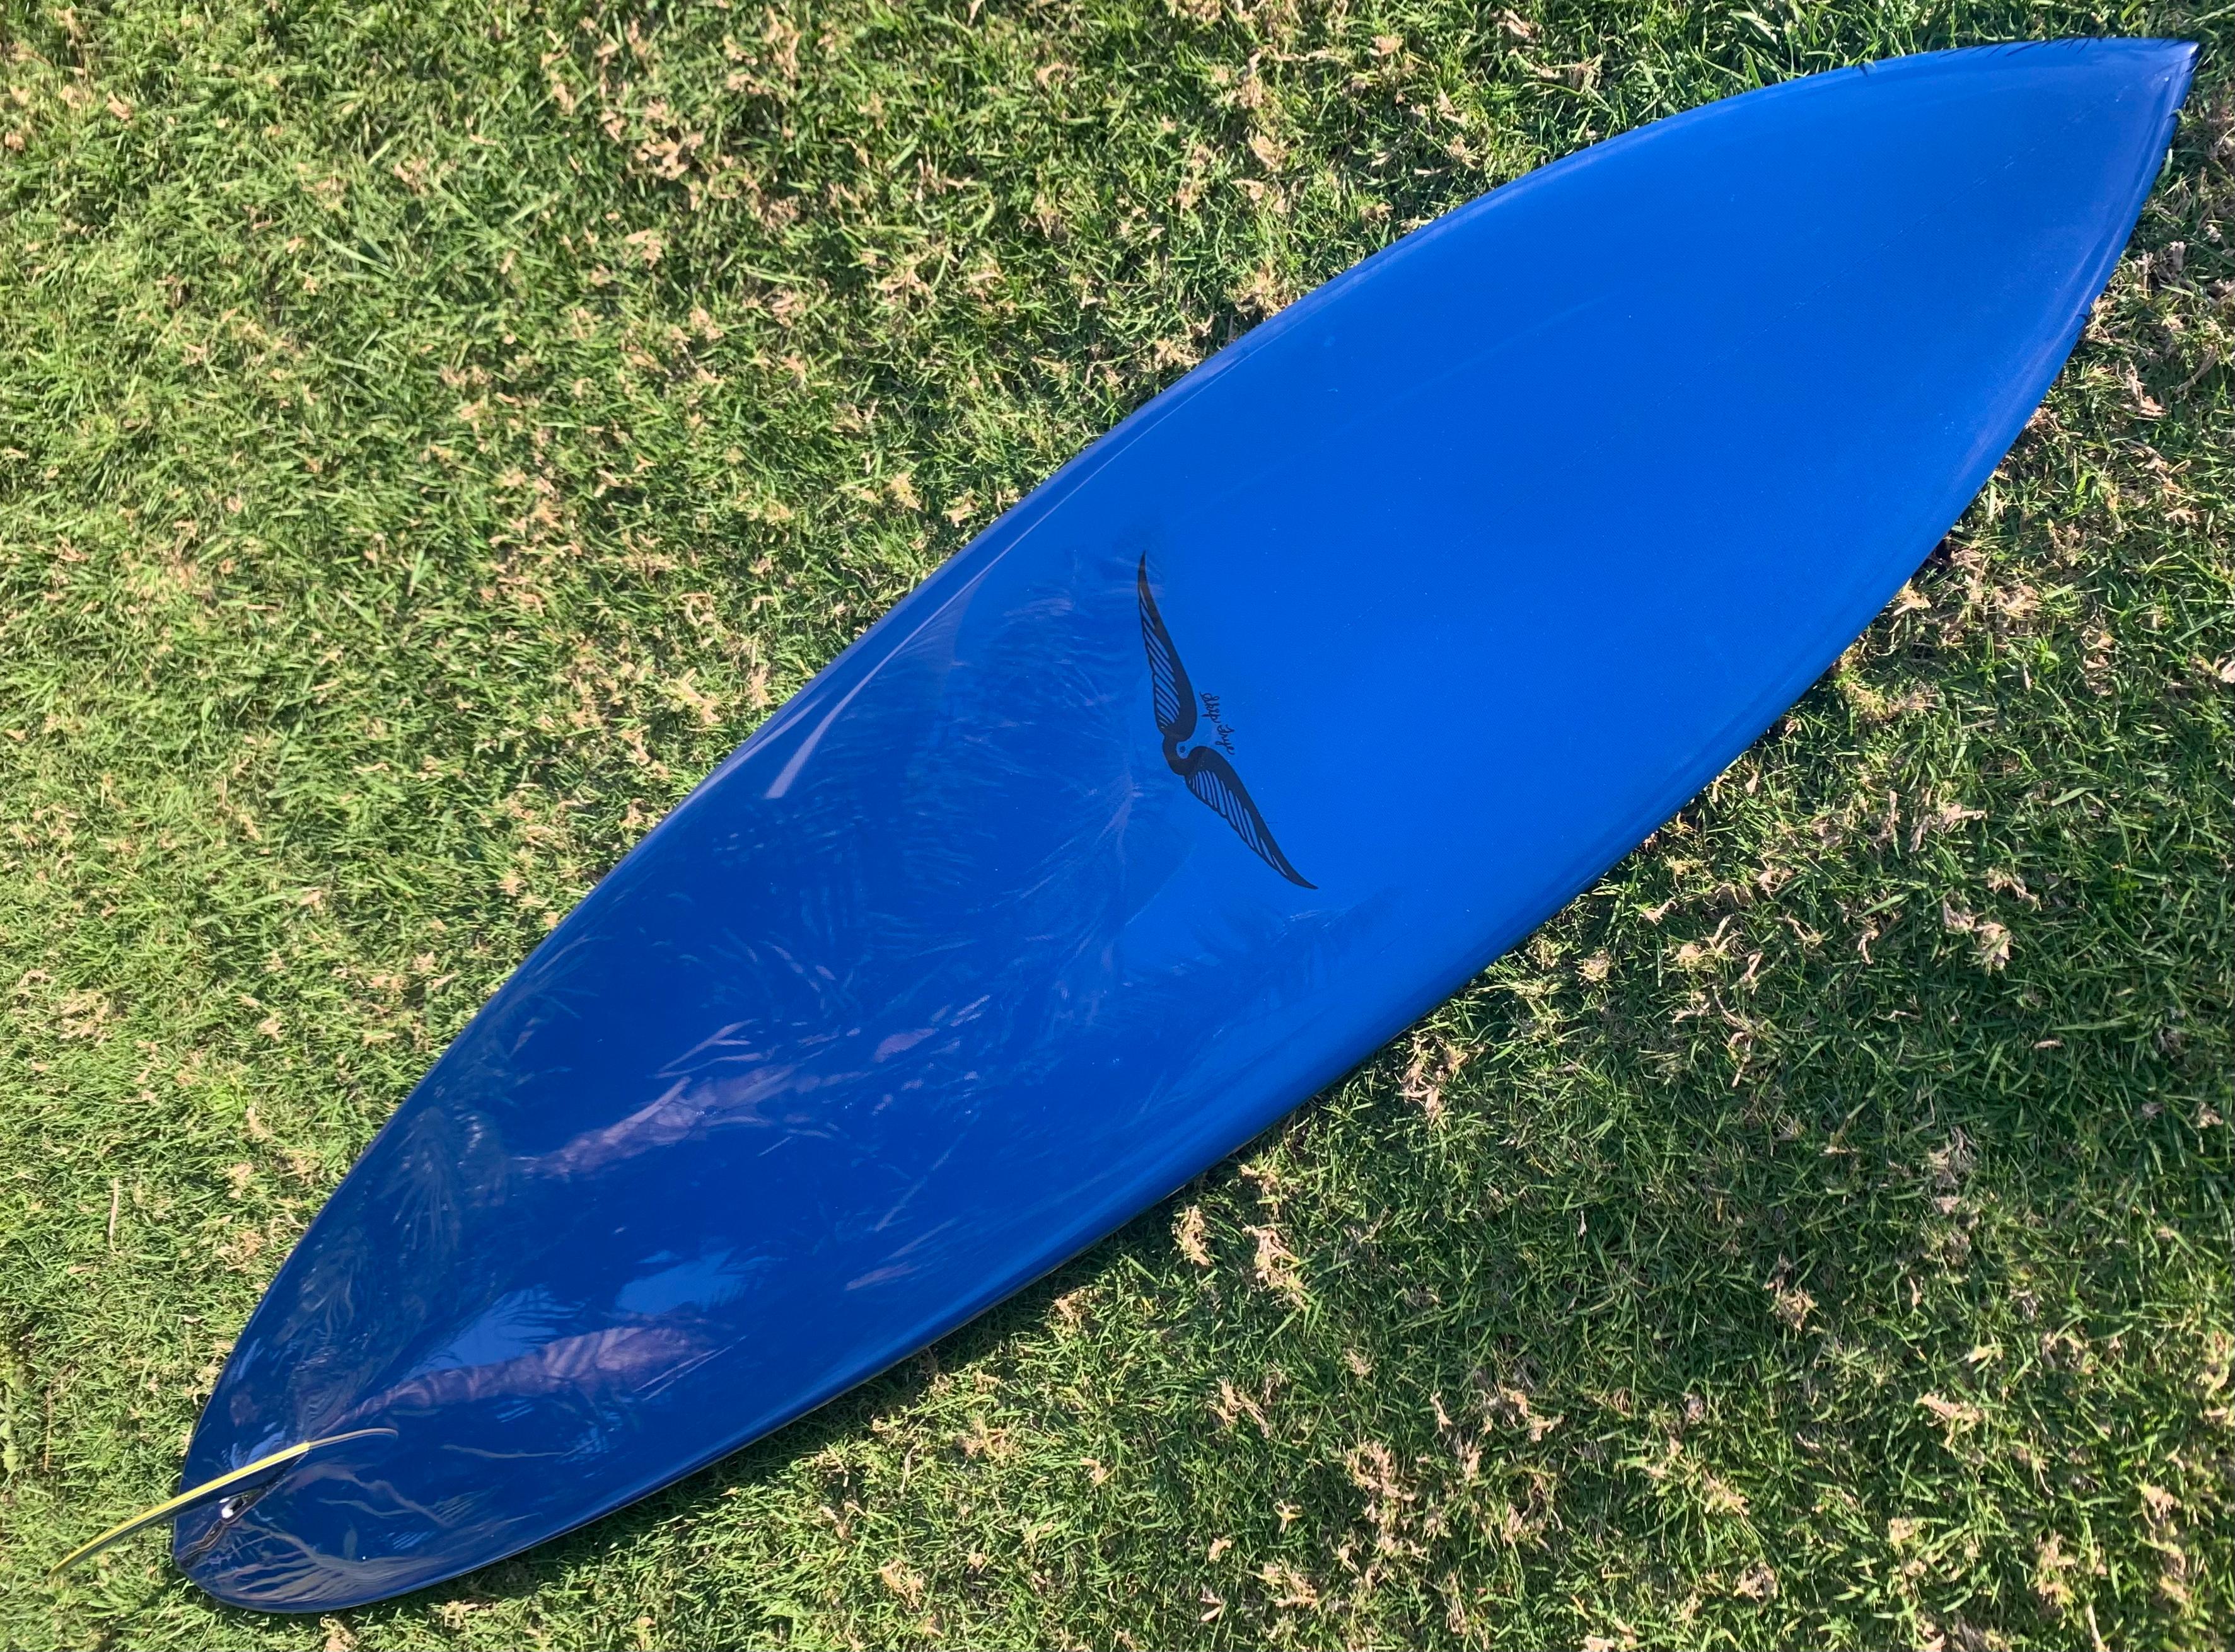 1975 Vintage Skip Frye shaped surfboard. Features beautiful light blue deck with navy blue bottom and complimentary pinstriping. Wooden fin with blue see-through window. A gorgeous example of a full restored vintage 1970s Skip Frye surfboard. 